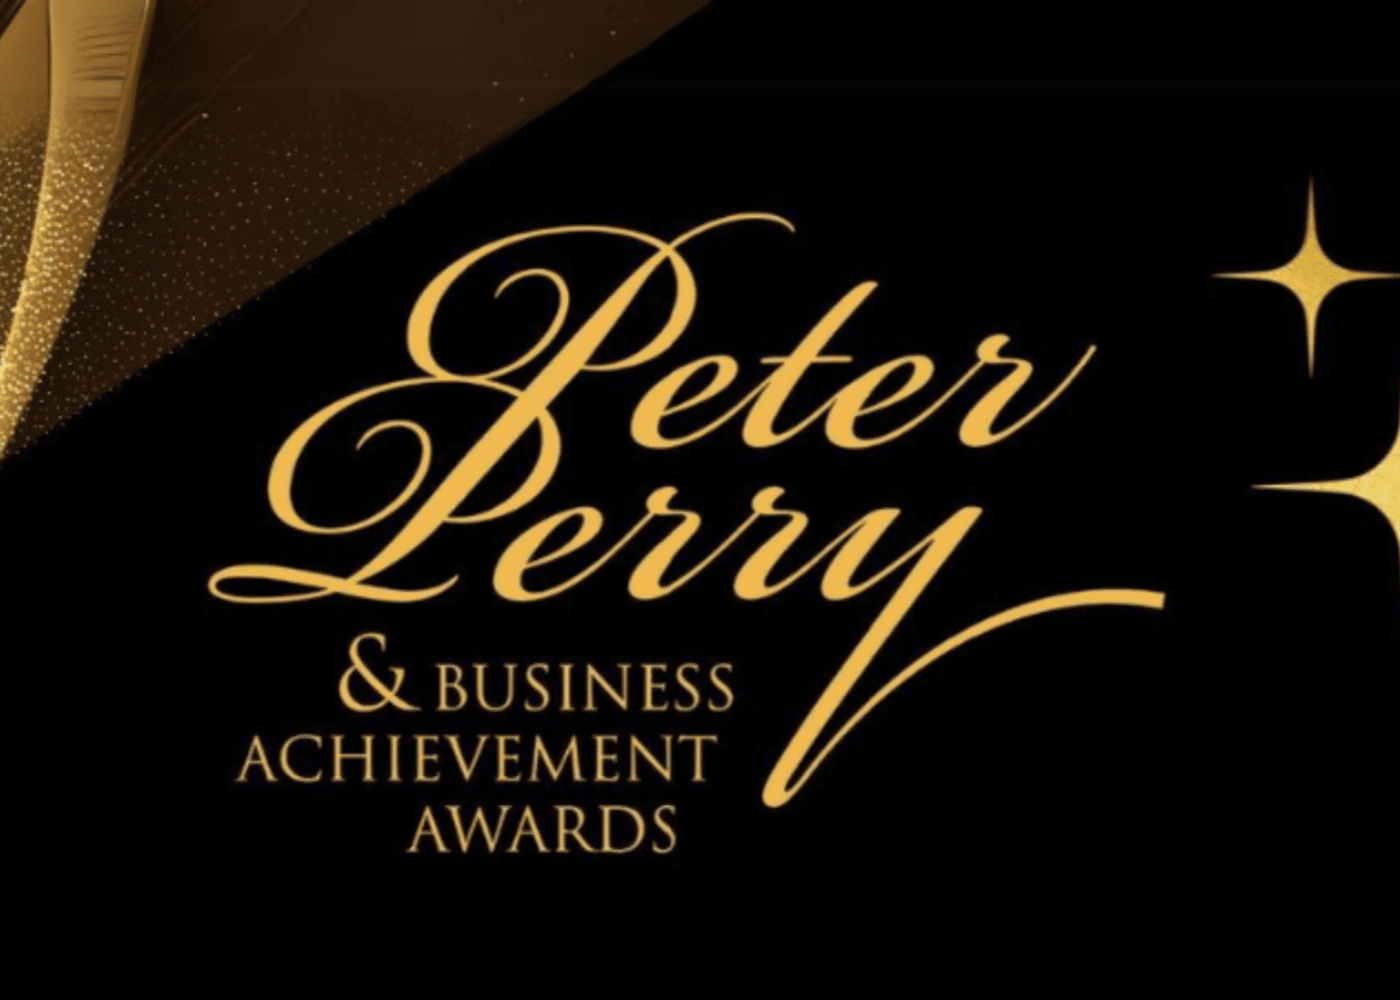 Peter Perry Awards Advertisement Image